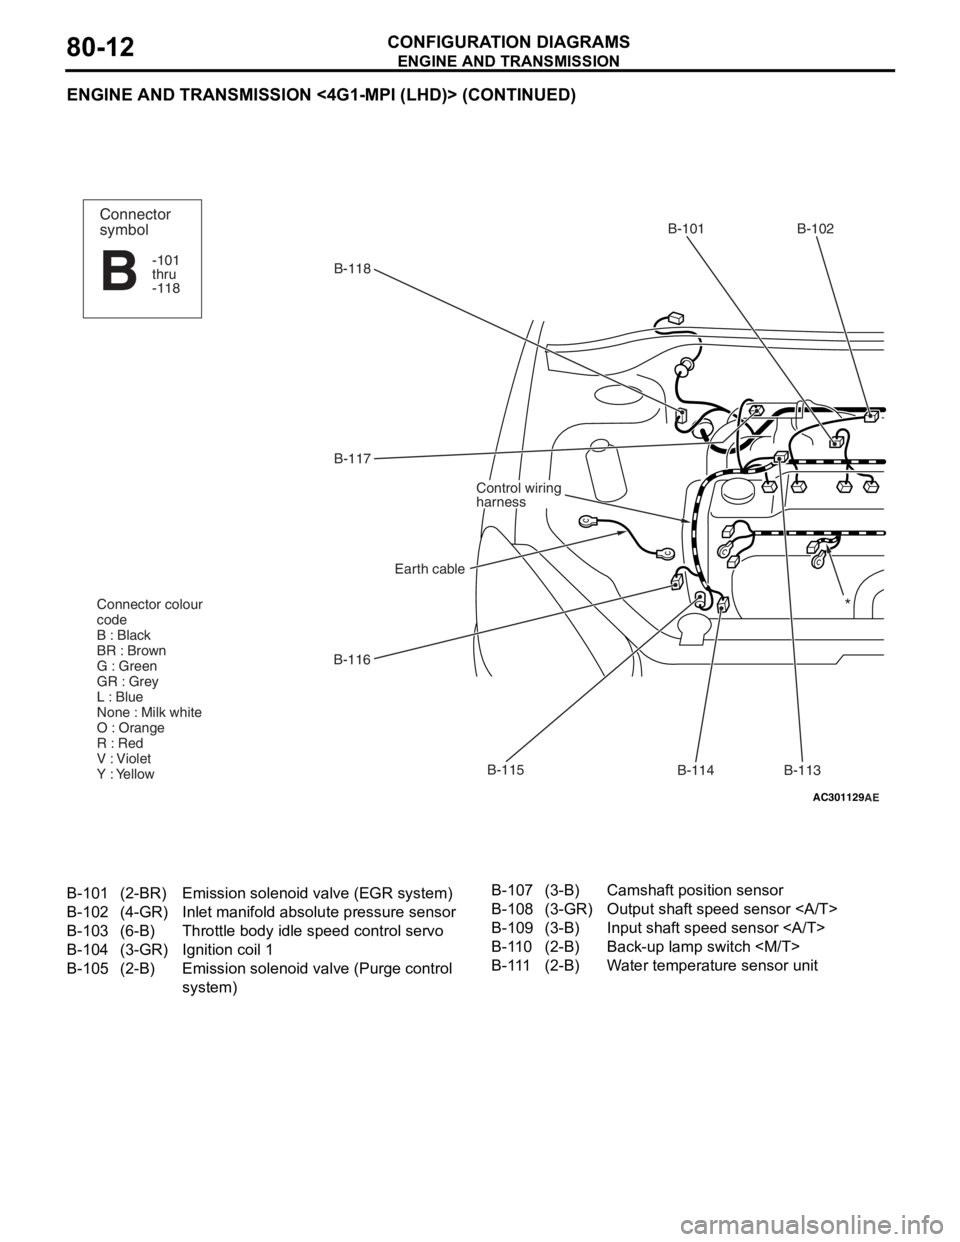 MITSUBISHI LANCER IX 2006  Service Manual 
ENGINE AND TRANSMISSION
CONFIGURATION DIAGRAMS80-12
ENGINE AND TRANSMISSION <4G1-MPI (LHD)> (CONTINUED)
AC301129AE
B-118B-101 B-102
B-113
B-114
B-115
B-116 B-117
Earth cable
Control wiring
harness
Co